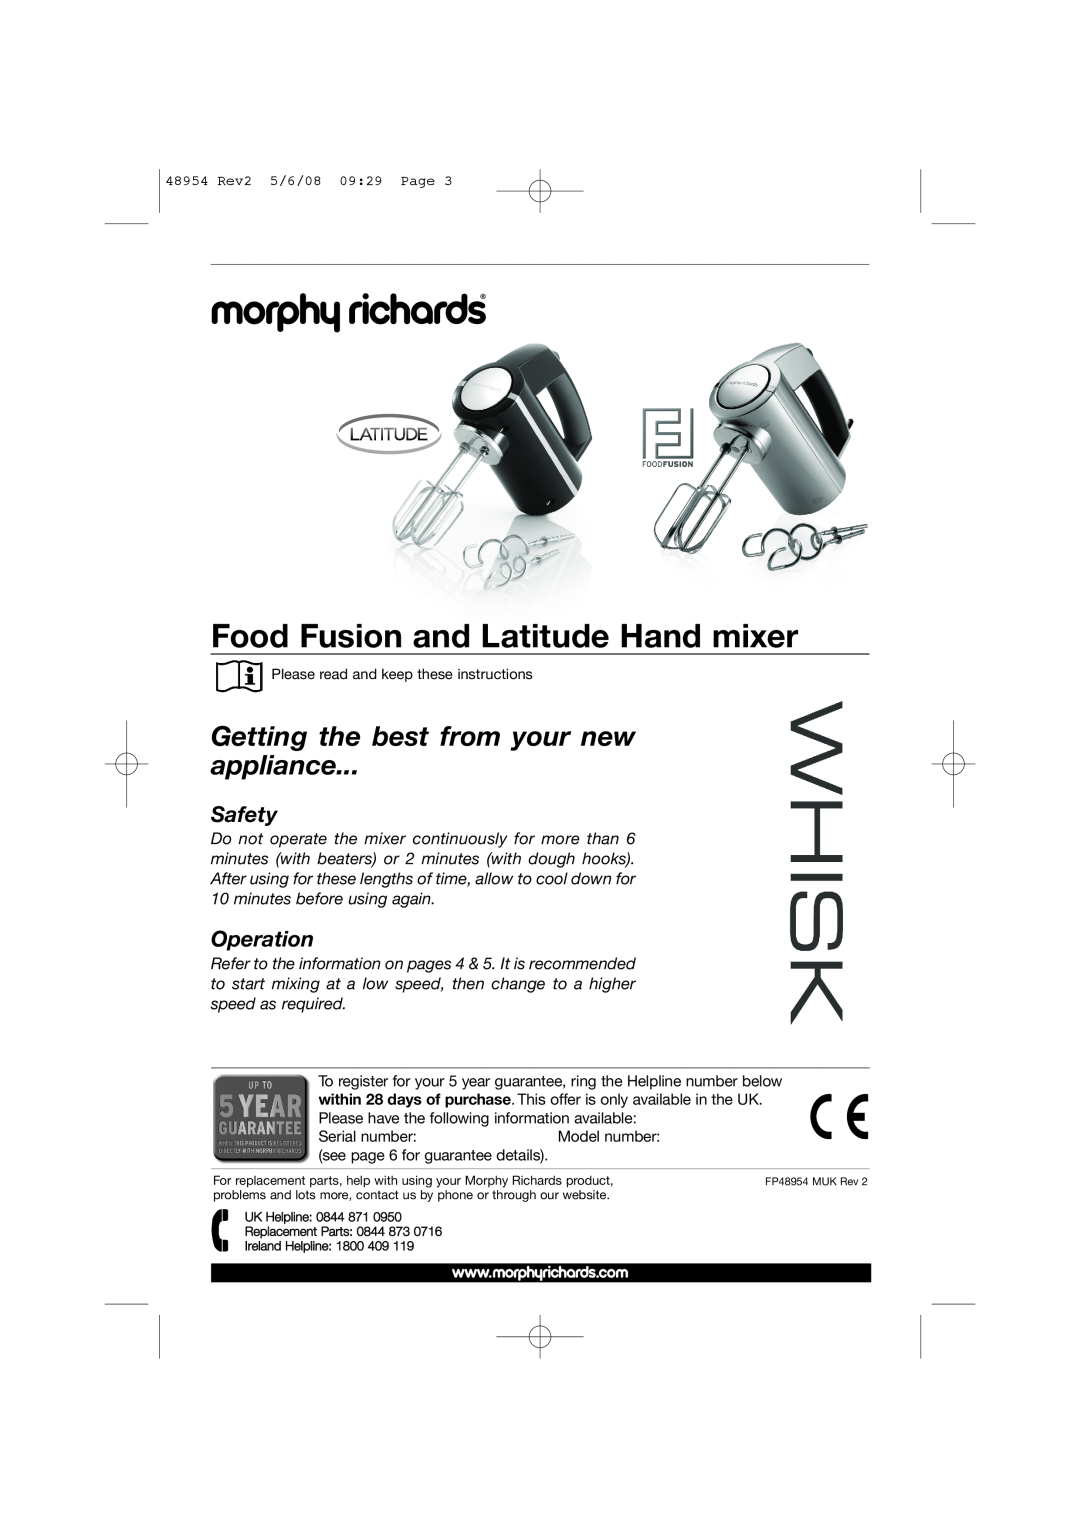 Morphy Richards 48954 Food Fusion and Latitude Hand mixer, Getting the best from your new appliance, Safety, Operation 